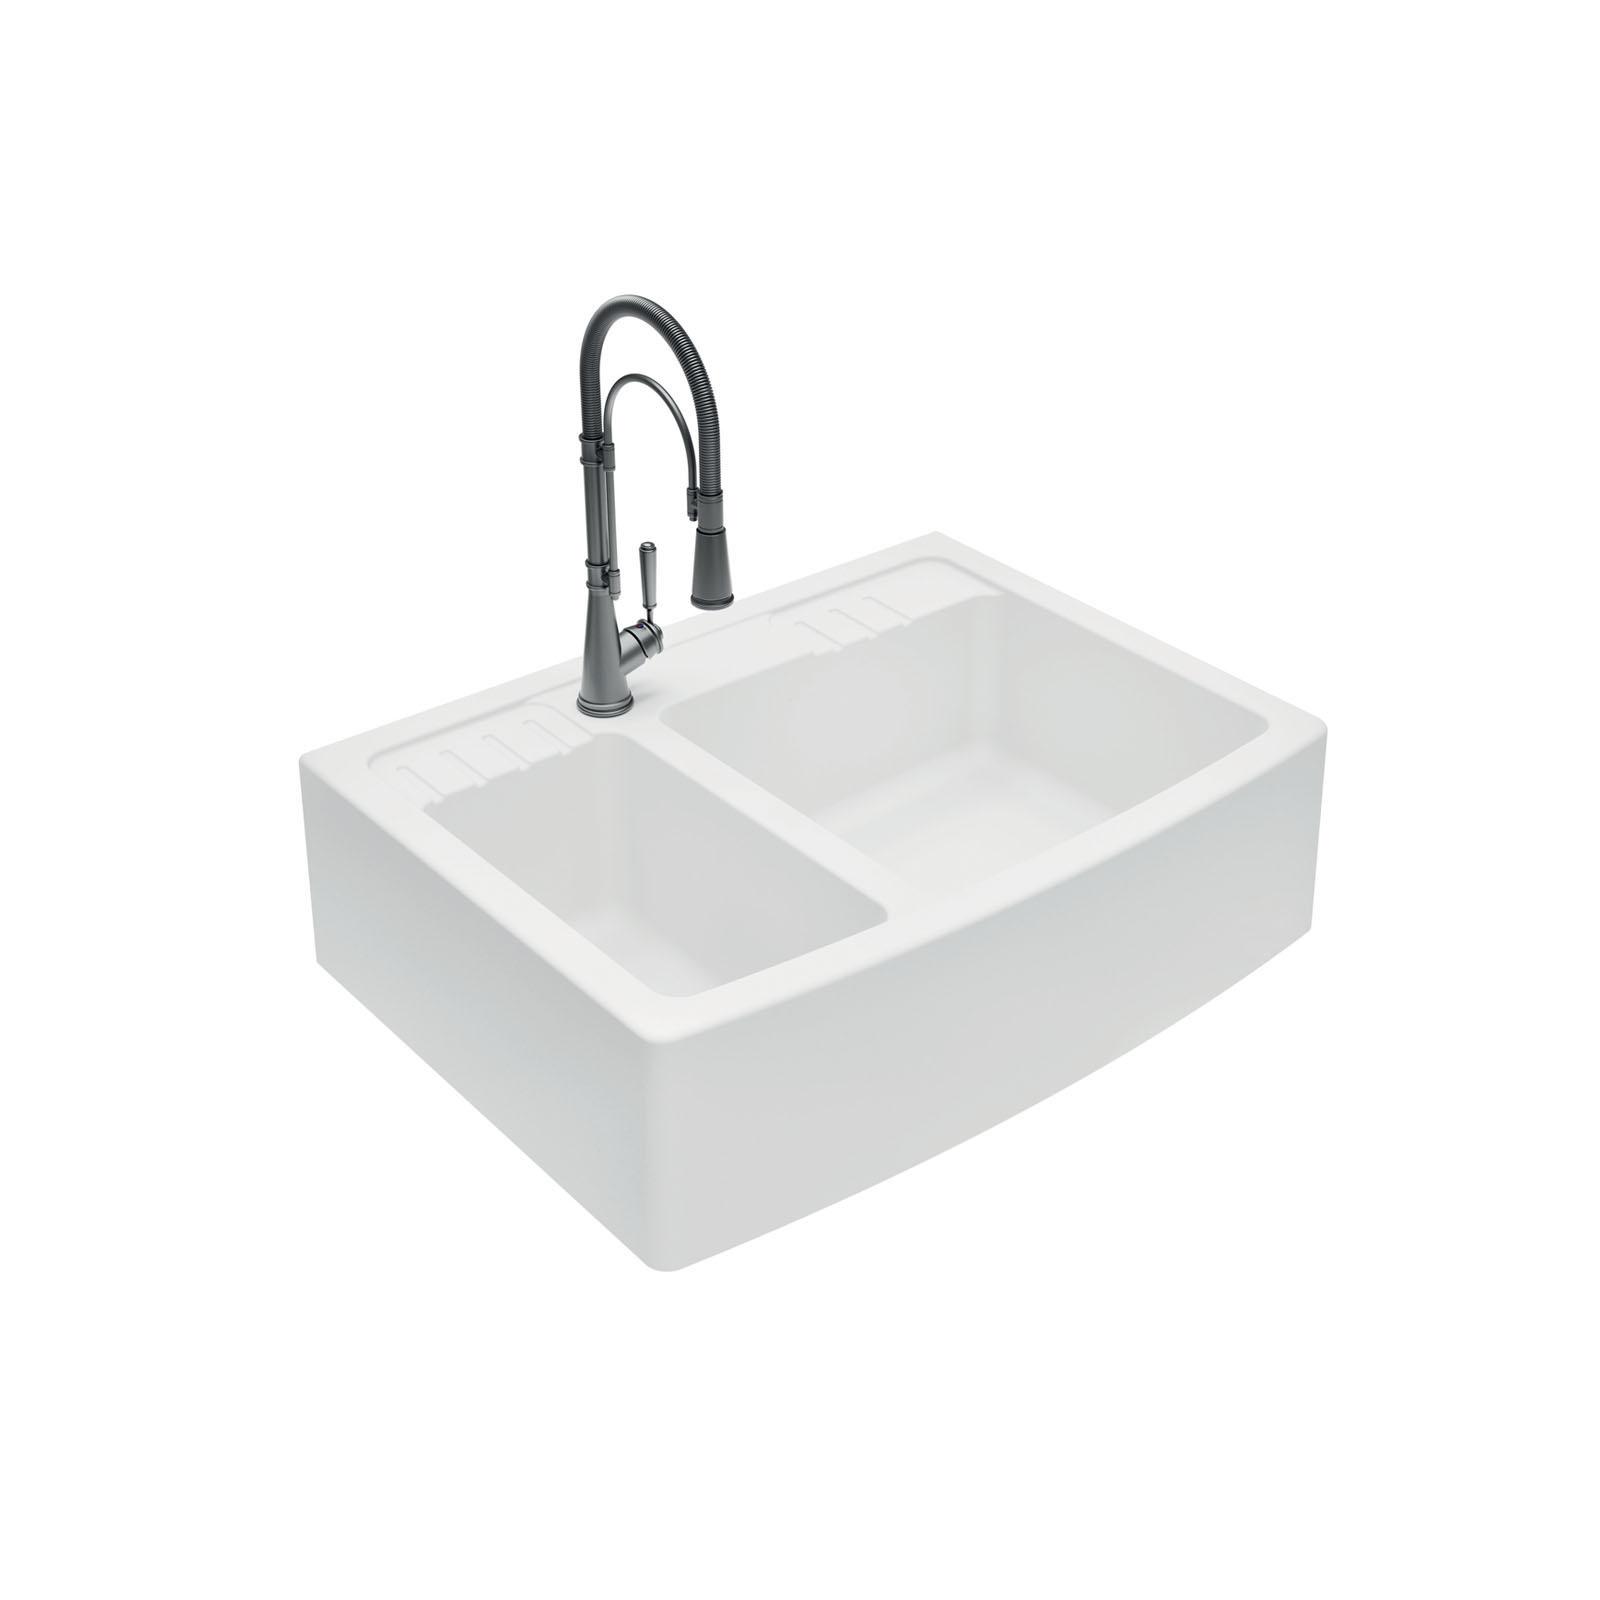 High-quality sink Clotaire III granit white - one and a half bowl - ambience 2